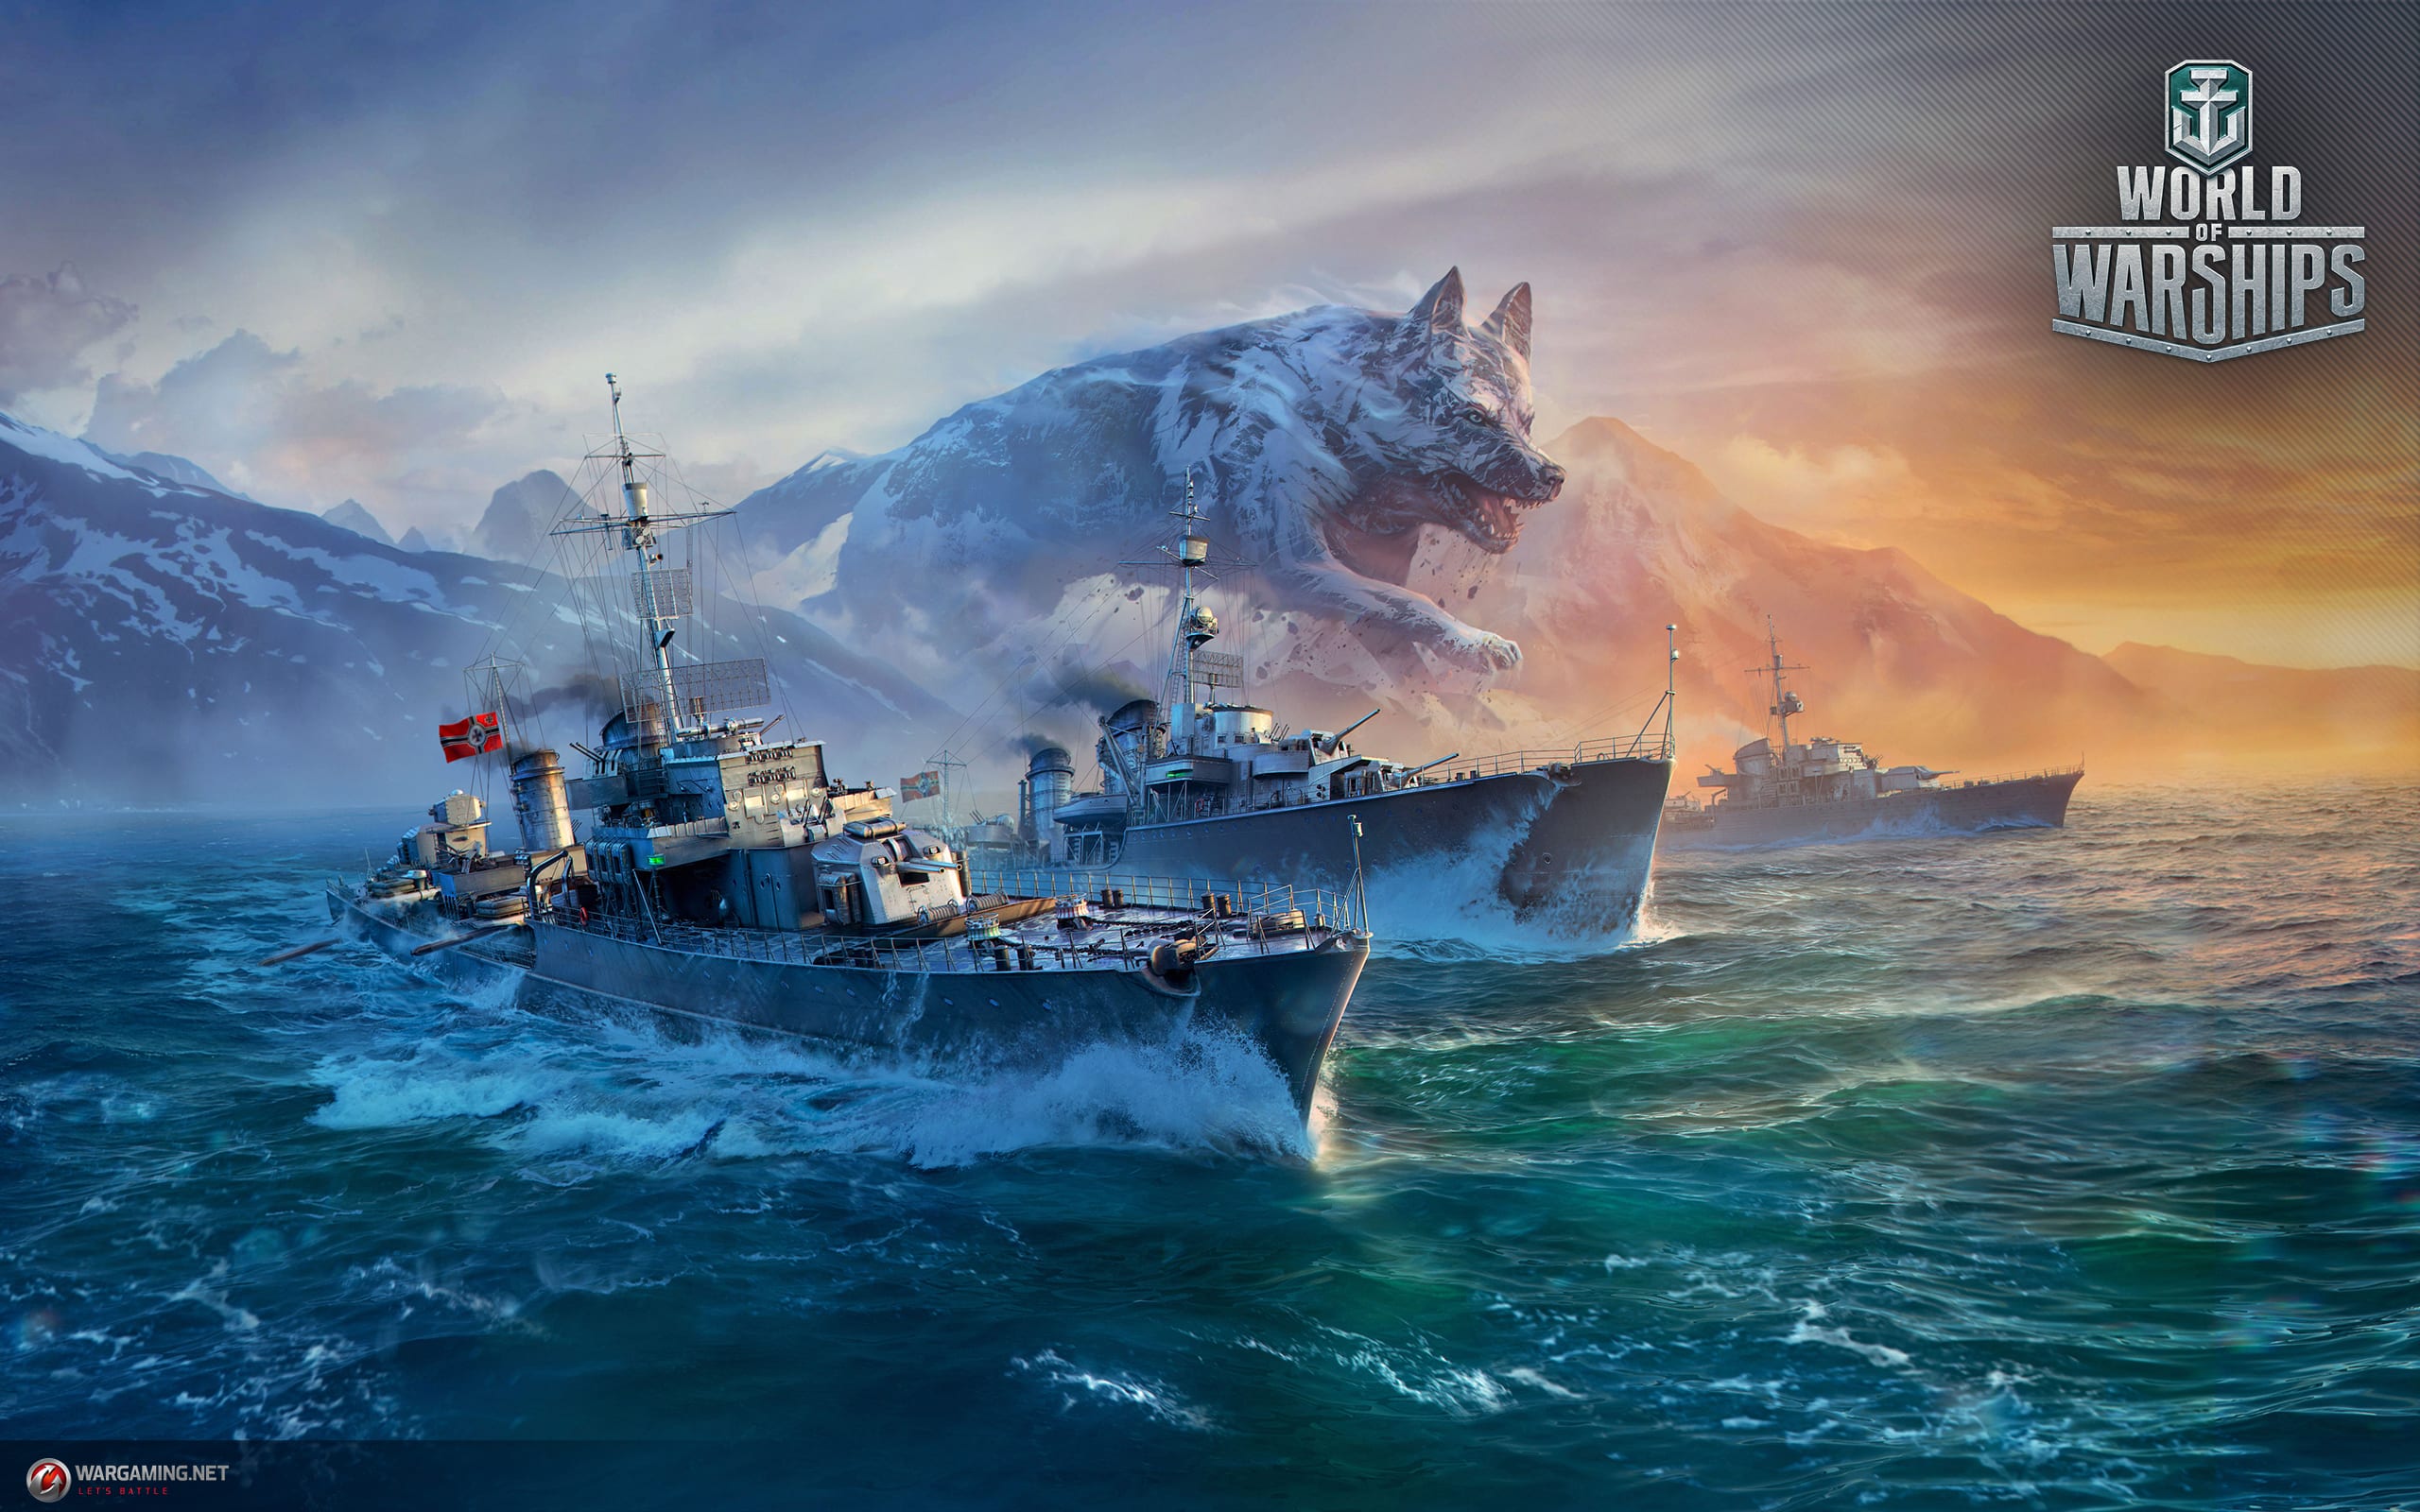 cheats for world of warships legends on xbox one